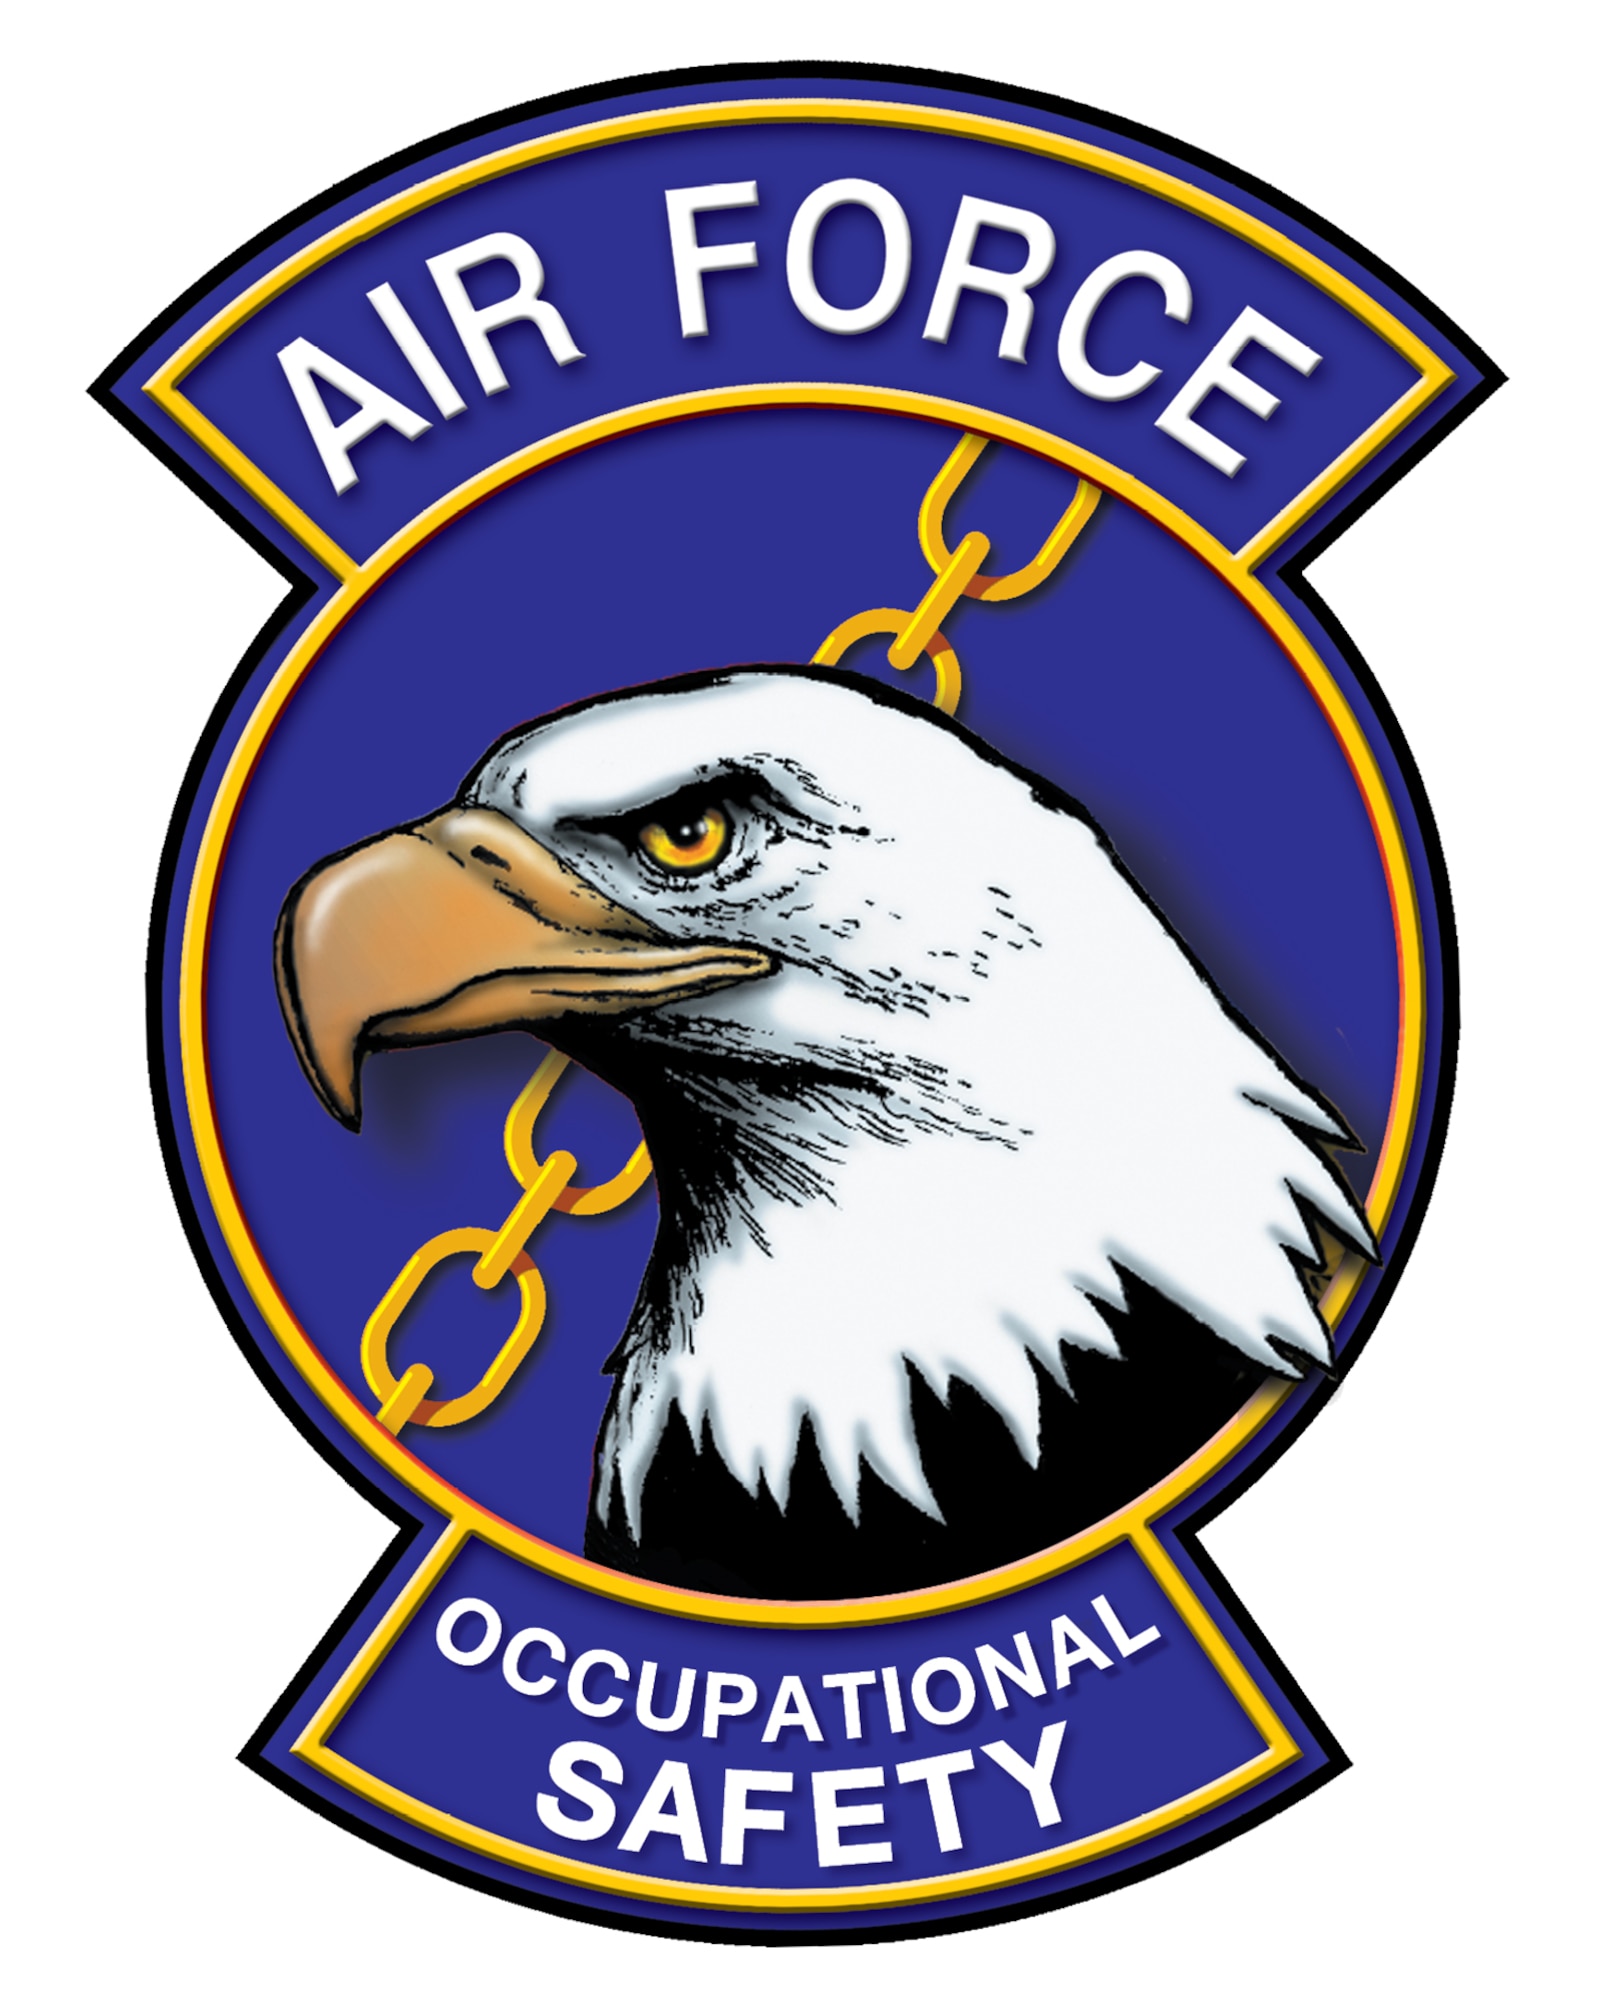 Occupational Safety patch (U.S. Air Force graphic)